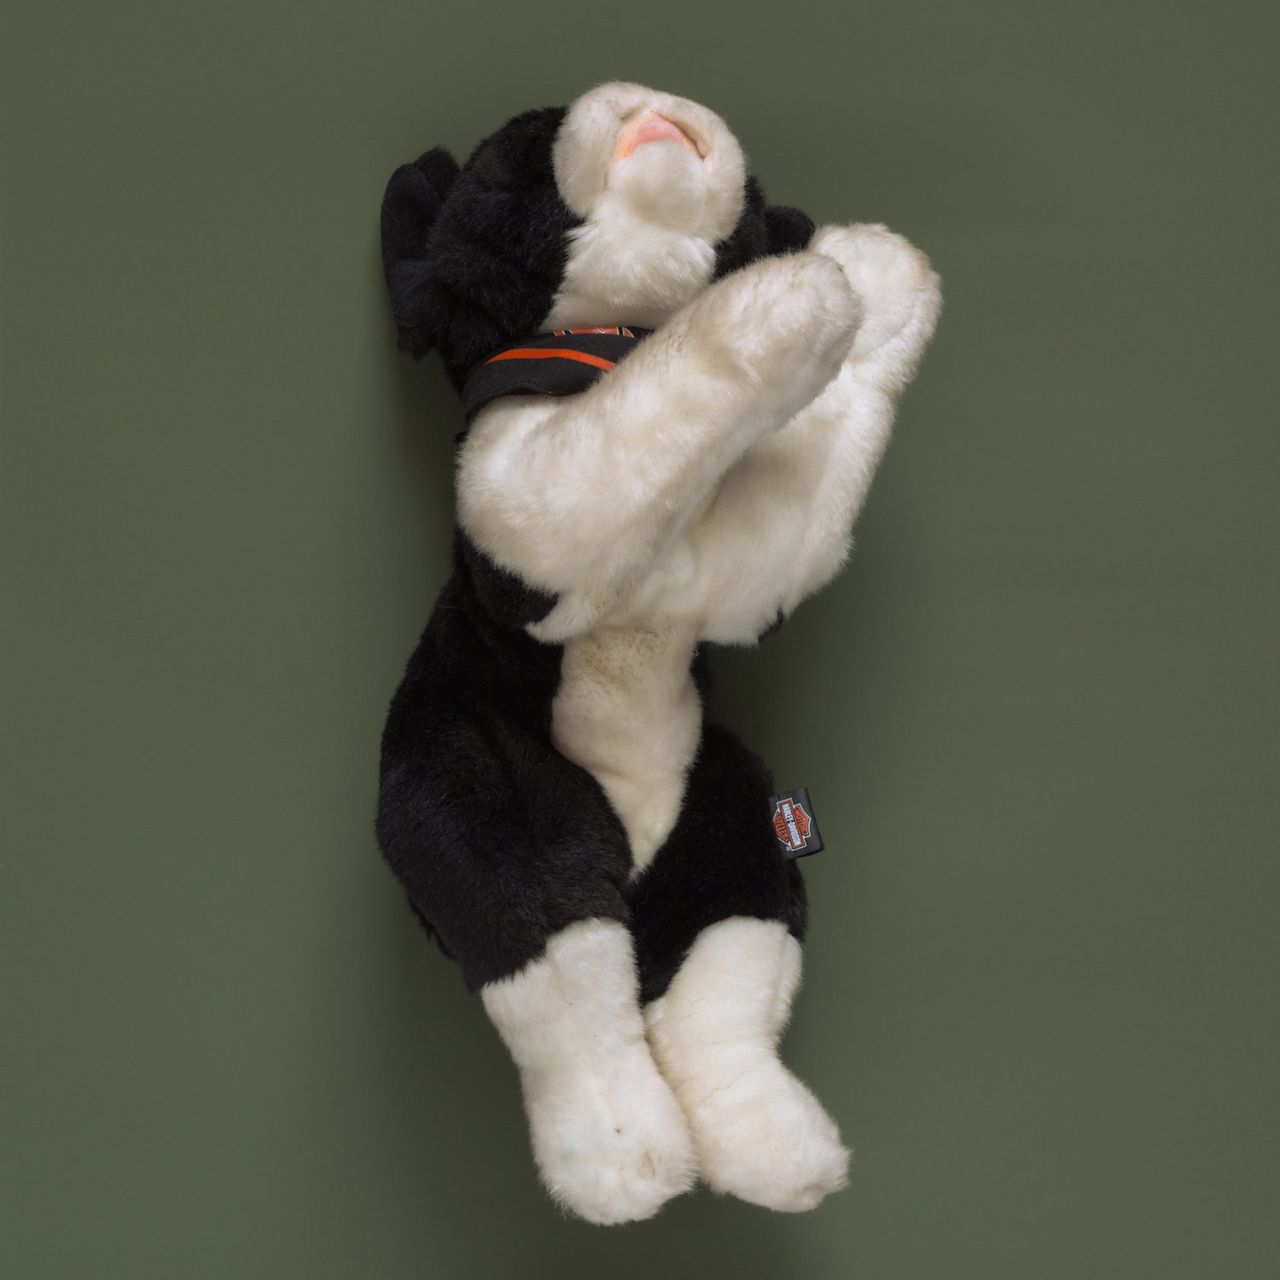 Tom Kiefer, a photographer in Arizona, spent 11 years (2003-2014) as a janitor at a Customs and Border Protection facility. He collected the items that agents confiscated from migrants and threw out, and he photographed them. "Harley Dog," shared with HuffPost, is part of his collection "El Sueño Americano - The American Dream" and can be found at <a href="http://tomkiefer.com/" target="_blank" role="link" class=" js-entry-link cet-external-link" data-vars-item-name="http://tomkiefer.com" data-vars-item-type="text" data-vars-unit-name="5b2a629ce4b05d6c16c99fd7" data-vars-unit-type="buzz_body" data-vars-target-content-id="http://tomkiefer.com/" data-vars-target-content-type="url" data-vars-type="web_external_link" data-vars-subunit-name="article_body" data-vars-subunit-type="component" data-vars-position-in-subunit="8">http://tomkiefer.com</a> and <a href="https://www.instagram.com/tomkiefer.photographer/" target="_blank" role="link" class=" js-entry-link cet-external-link" data-vars-item-name="https://www.instagram.com/tomkiefer.photographer/" data-vars-item-type="text" data-vars-unit-name="5b2a629ce4b05d6c16c99fd7" data-vars-unit-type="buzz_body" data-vars-target-content-id="https://www.instagram.com/tomkiefer.photographer/" data-vars-target-content-type="url" data-vars-type="web_external_link" data-vars-subunit-name="article_body" data-vars-subunit-type="component" data-vars-position-in-subunit="9">https://www.instagram.com/tomkiefer.photographer/</a>.